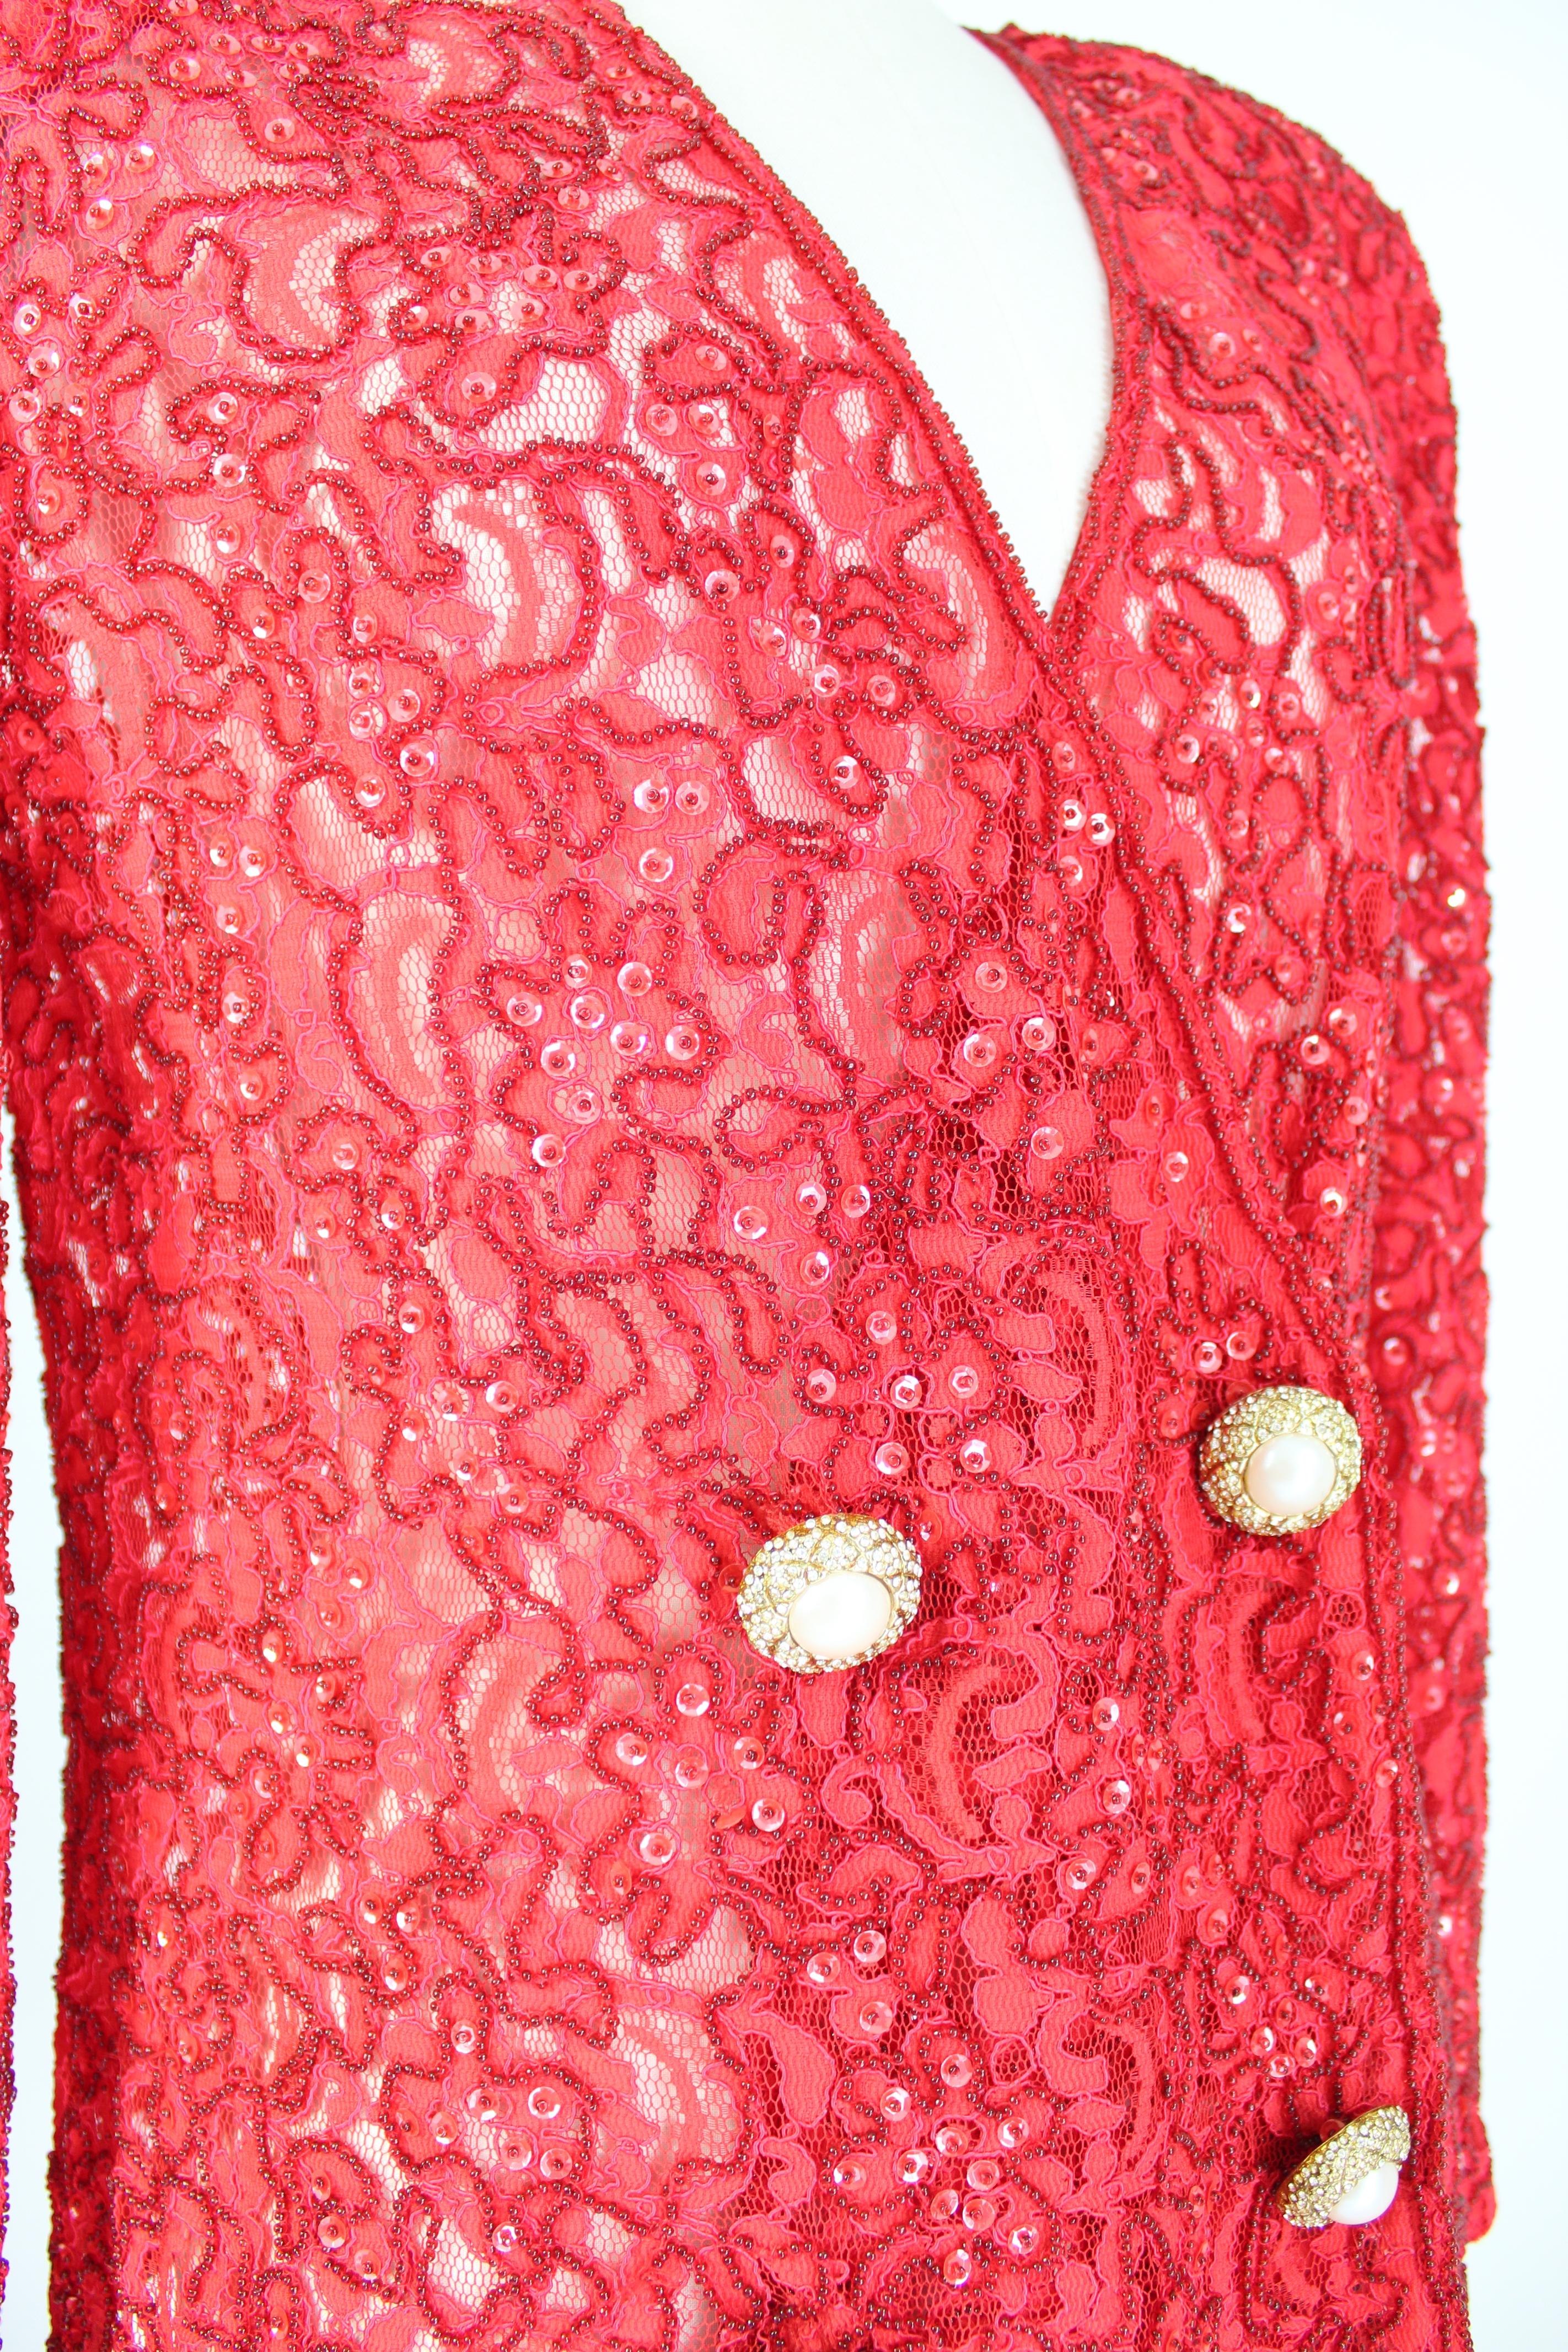 Mimmina Red Lace Sequins Beads Evening Jacket 1980s In Excellent Condition For Sale In Brindisi, Bt